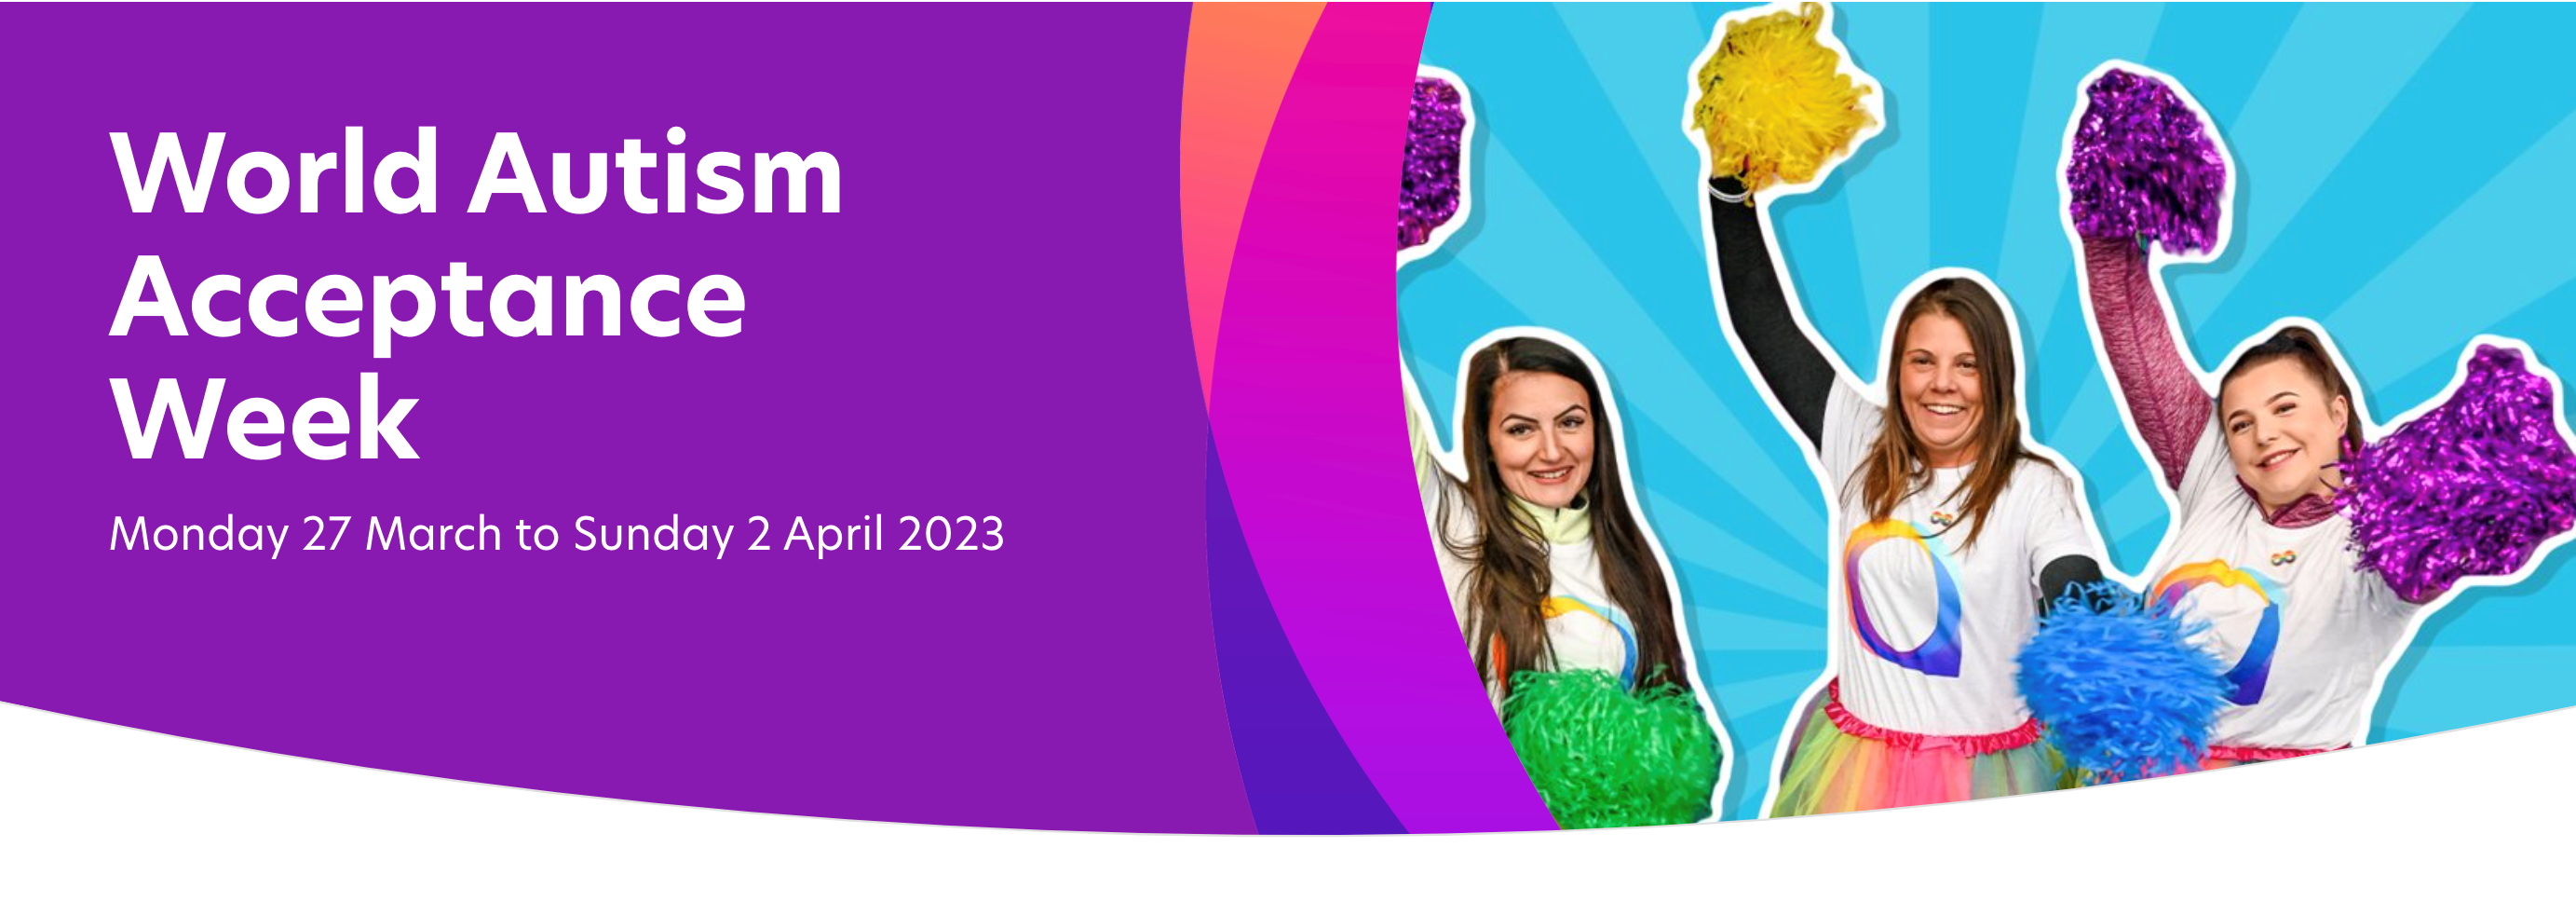 World Autism Acceptance Week, Monday 27 March to Sunday 2 April. Next to this text, three women wearing shirts with the National Autistic Society logo are smiling and holding up multicoloured pompoms